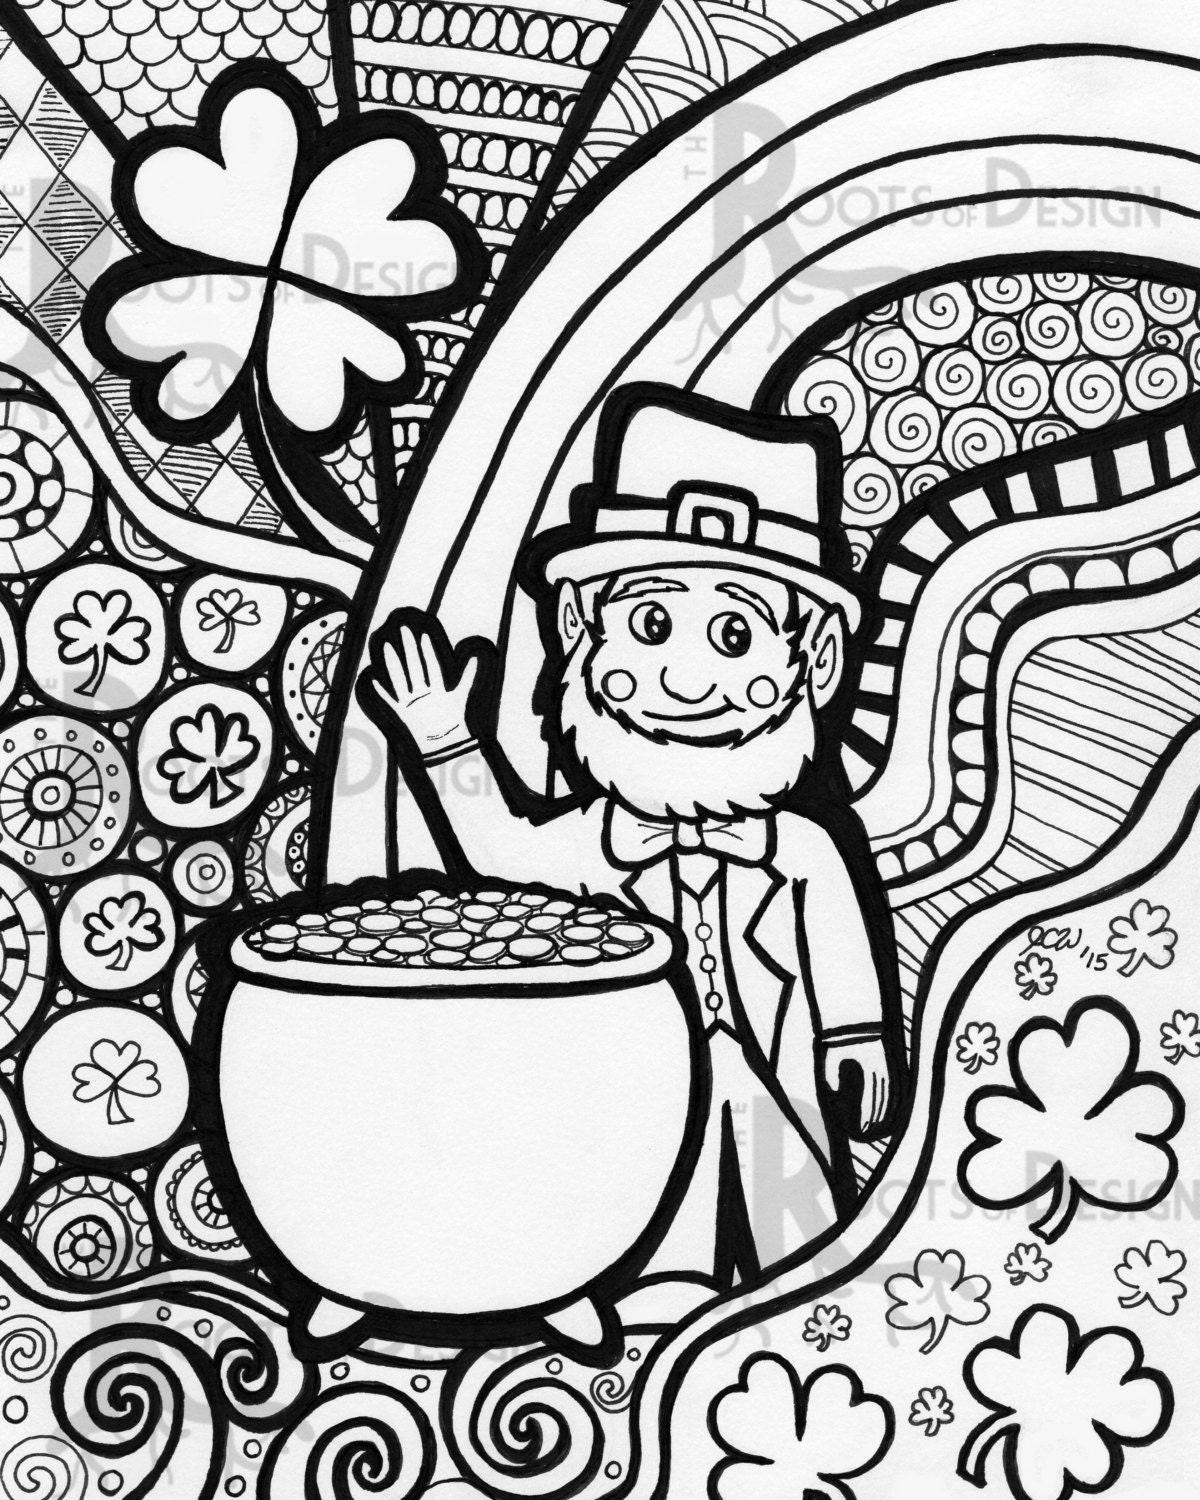 INSTANT DOWNLOAD Coloring Page St Patrick s Day By RootsDesign